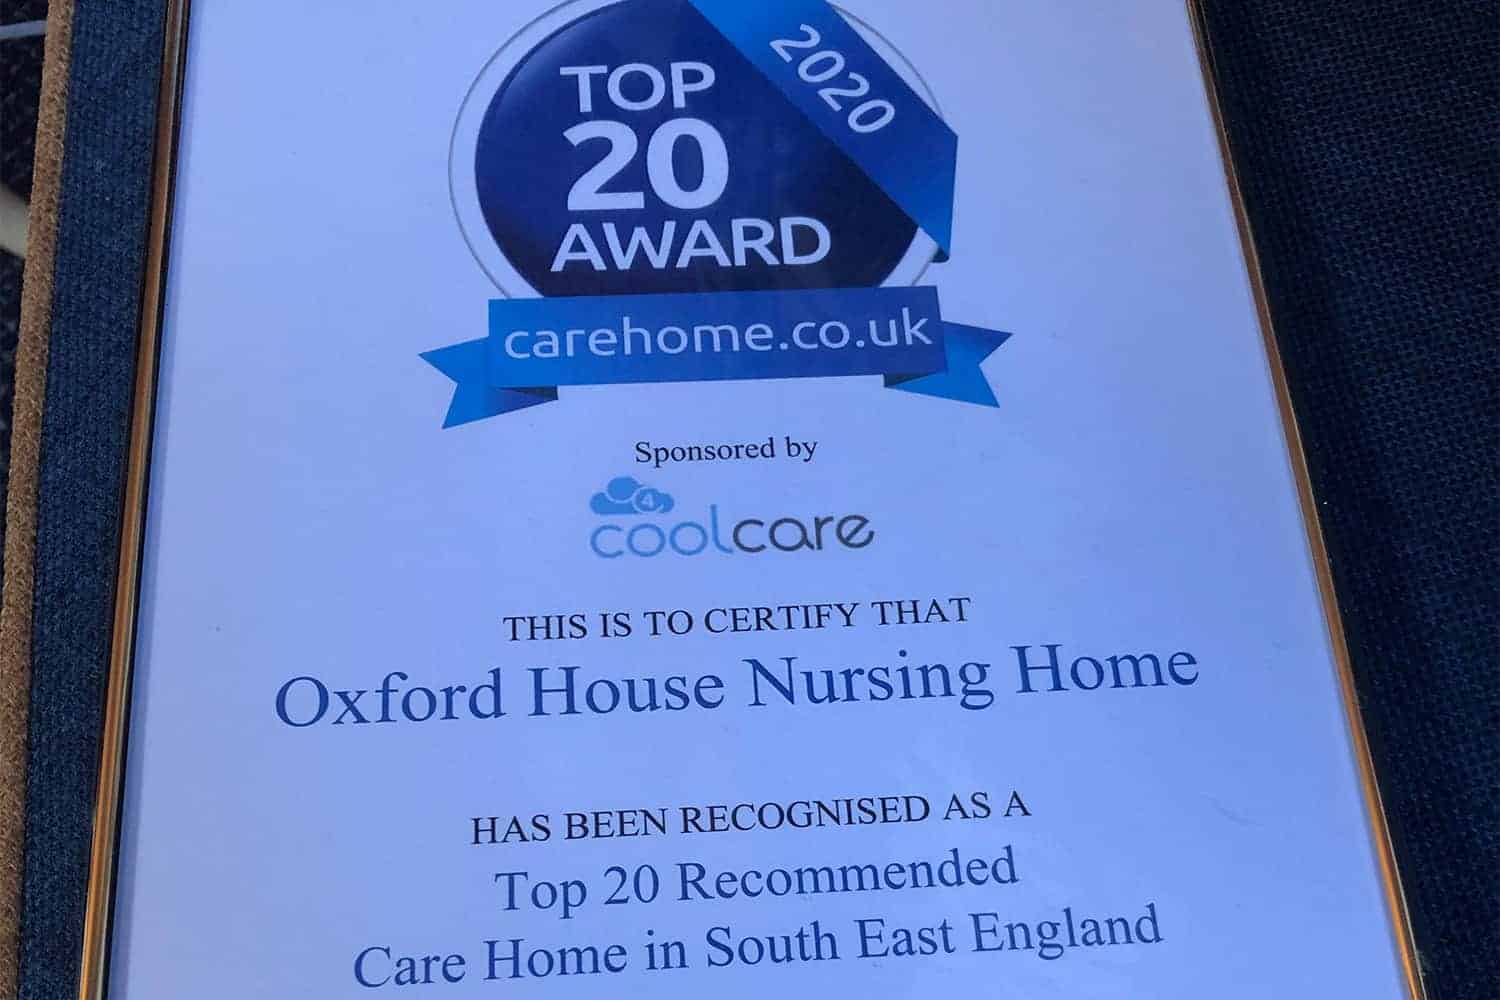 An award certificate for "top 20 care home 2020" from carehome.co.uk, certifying Oxford House Nursing Home as recommended for its elderly care within South East England.